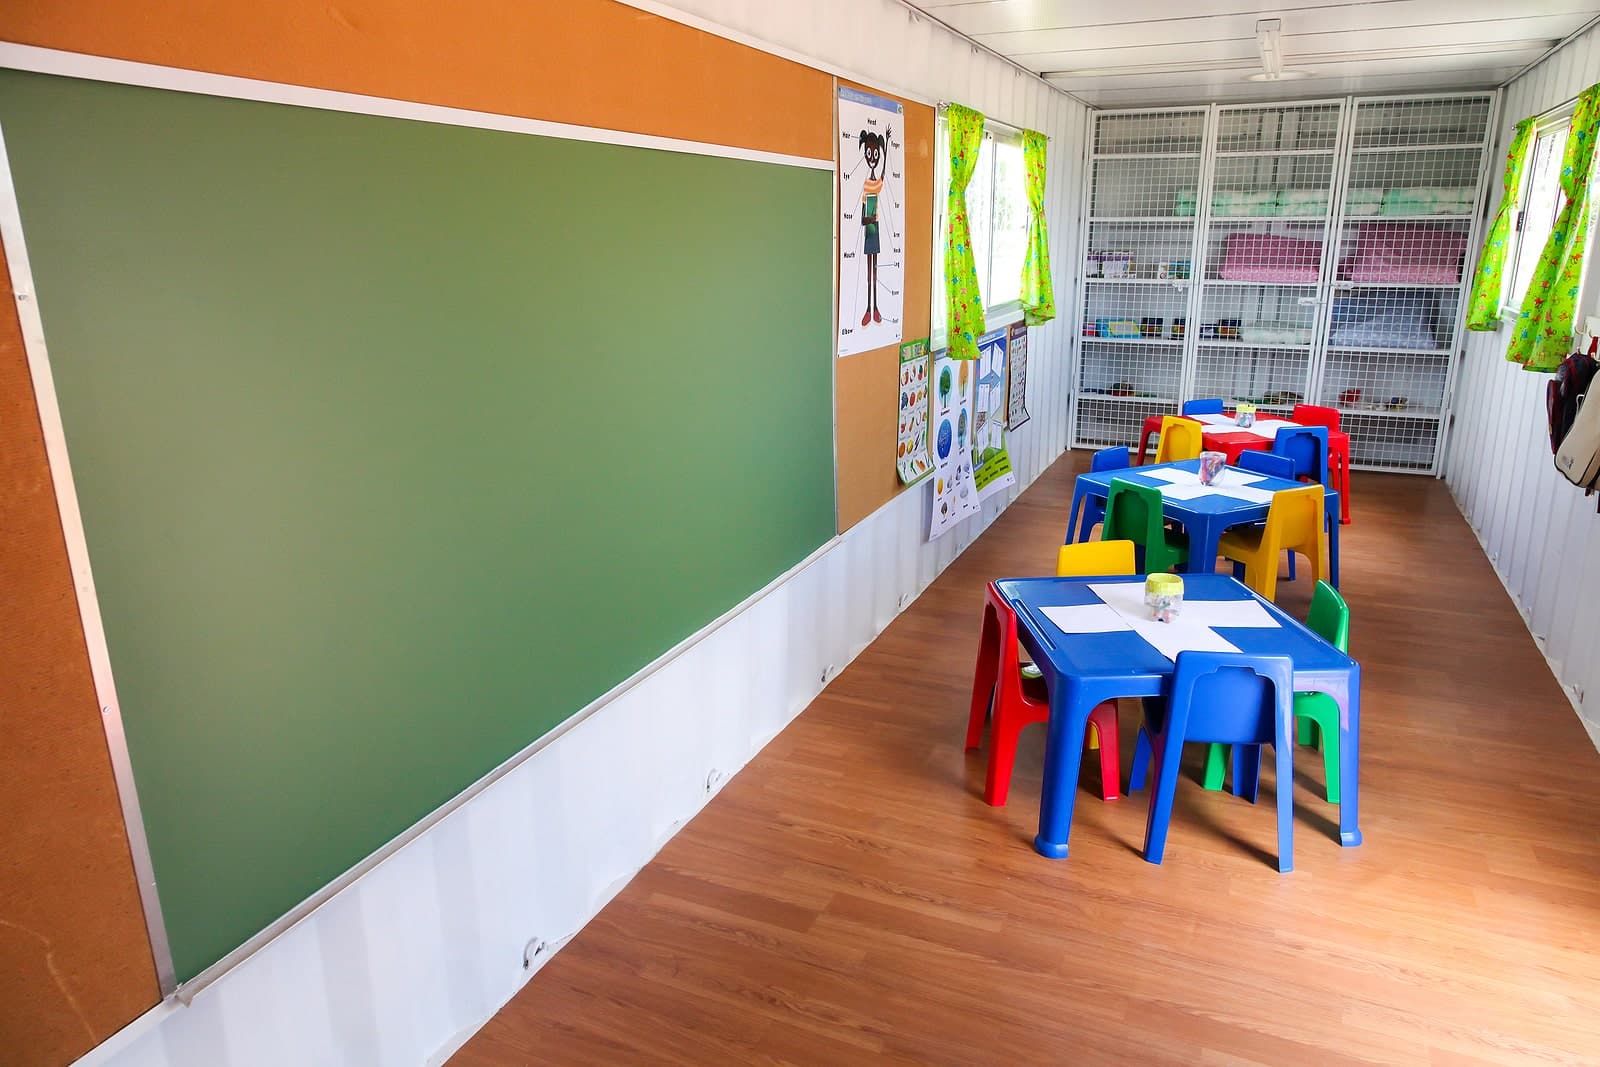 Image of a storage container classroom